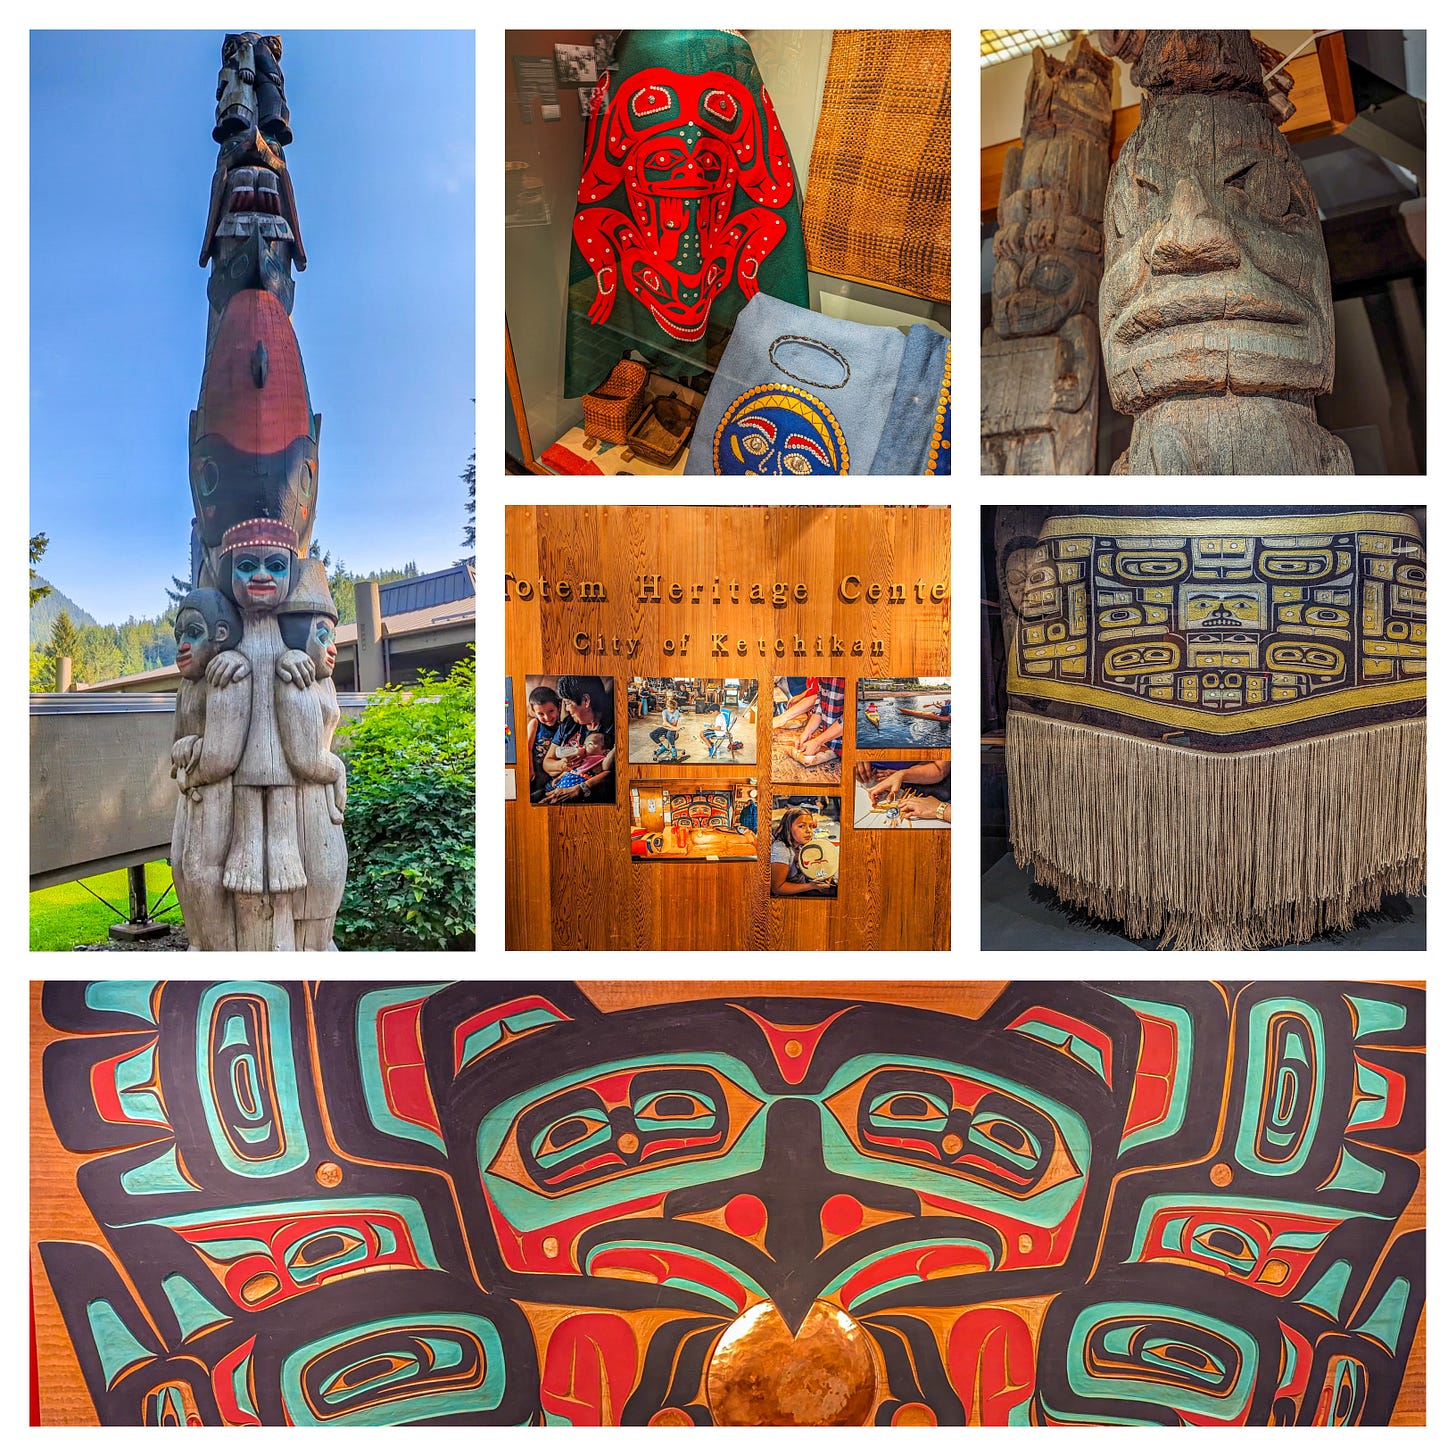 Collage of items from the Totem Heritage center including new and old totem poles, a beautiful red and green cape, a wall hanging, and a wood carving.